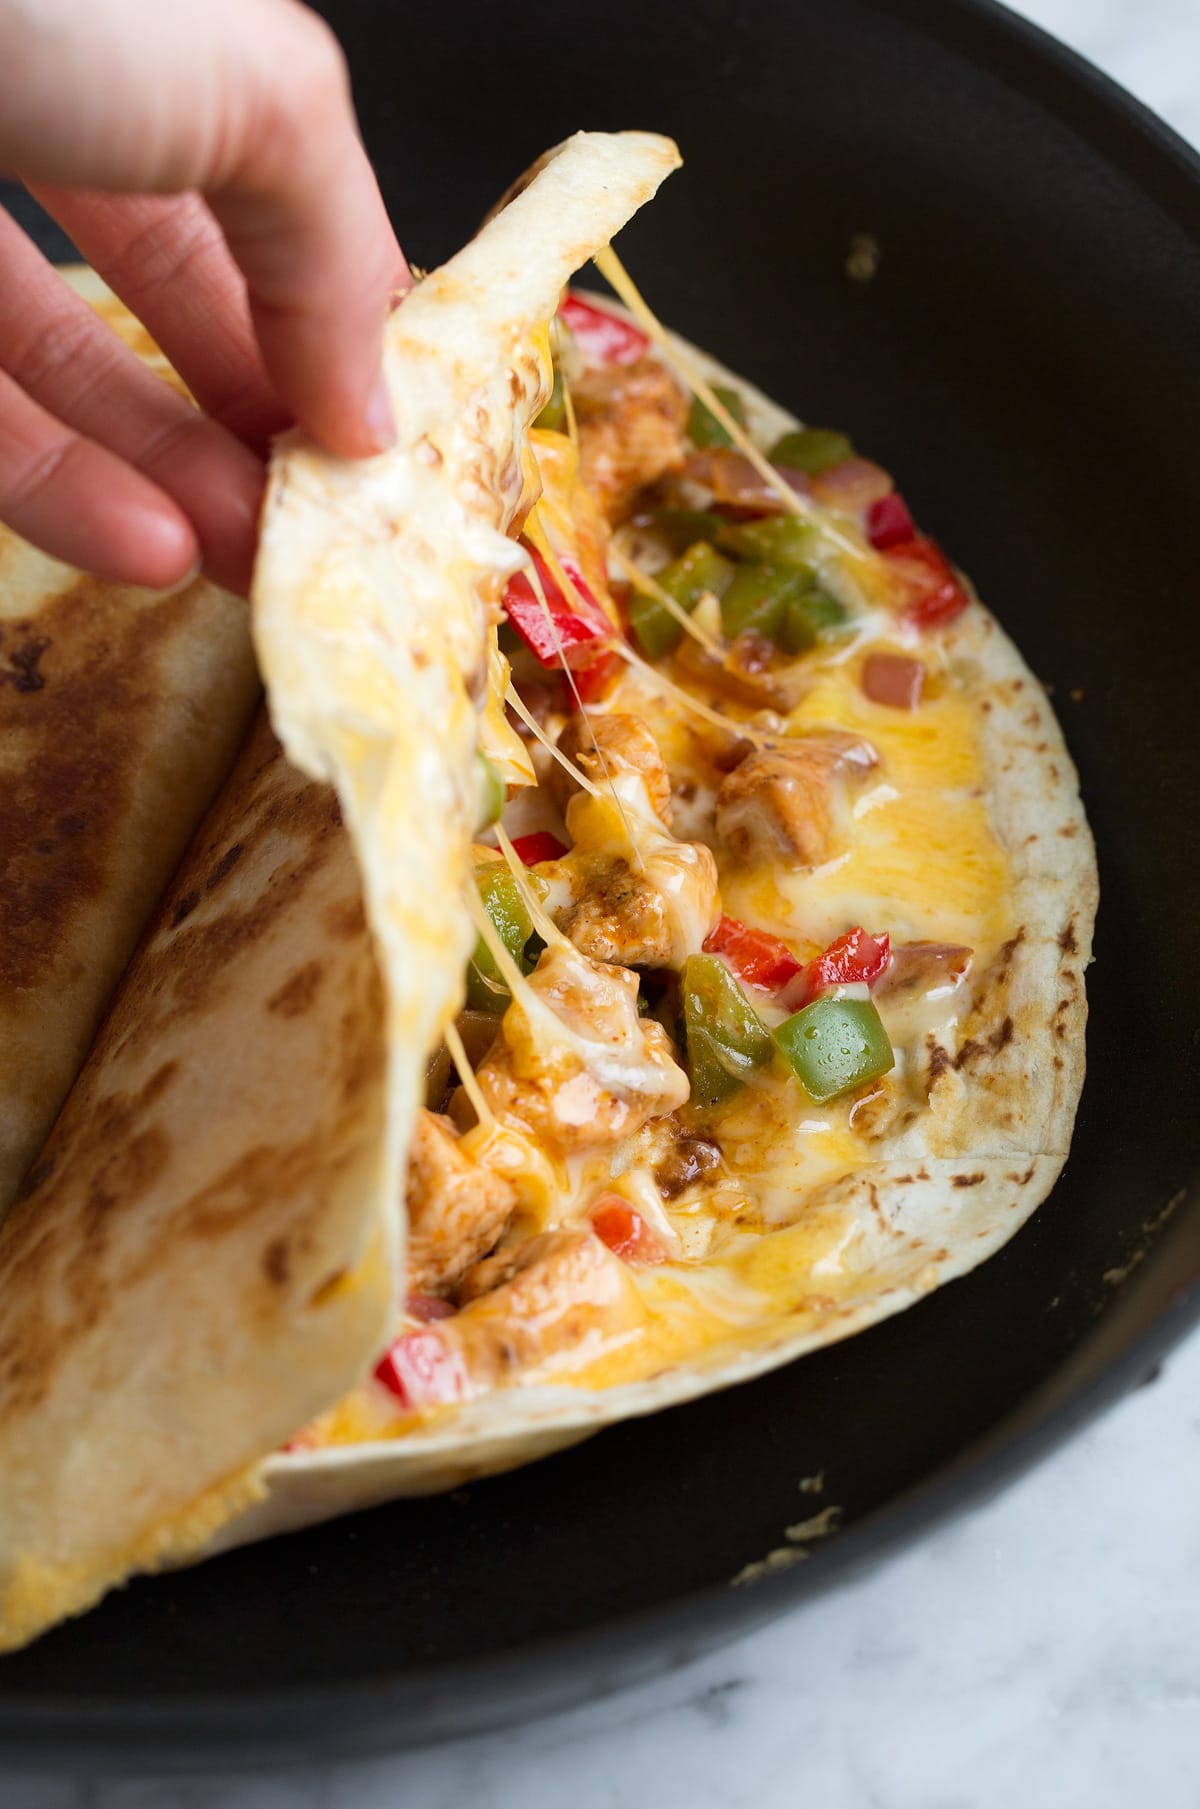 Hand opening quesadilla in a skillet to show filling of cheese, bell peppers, onions, and seasoned chicken pieces.